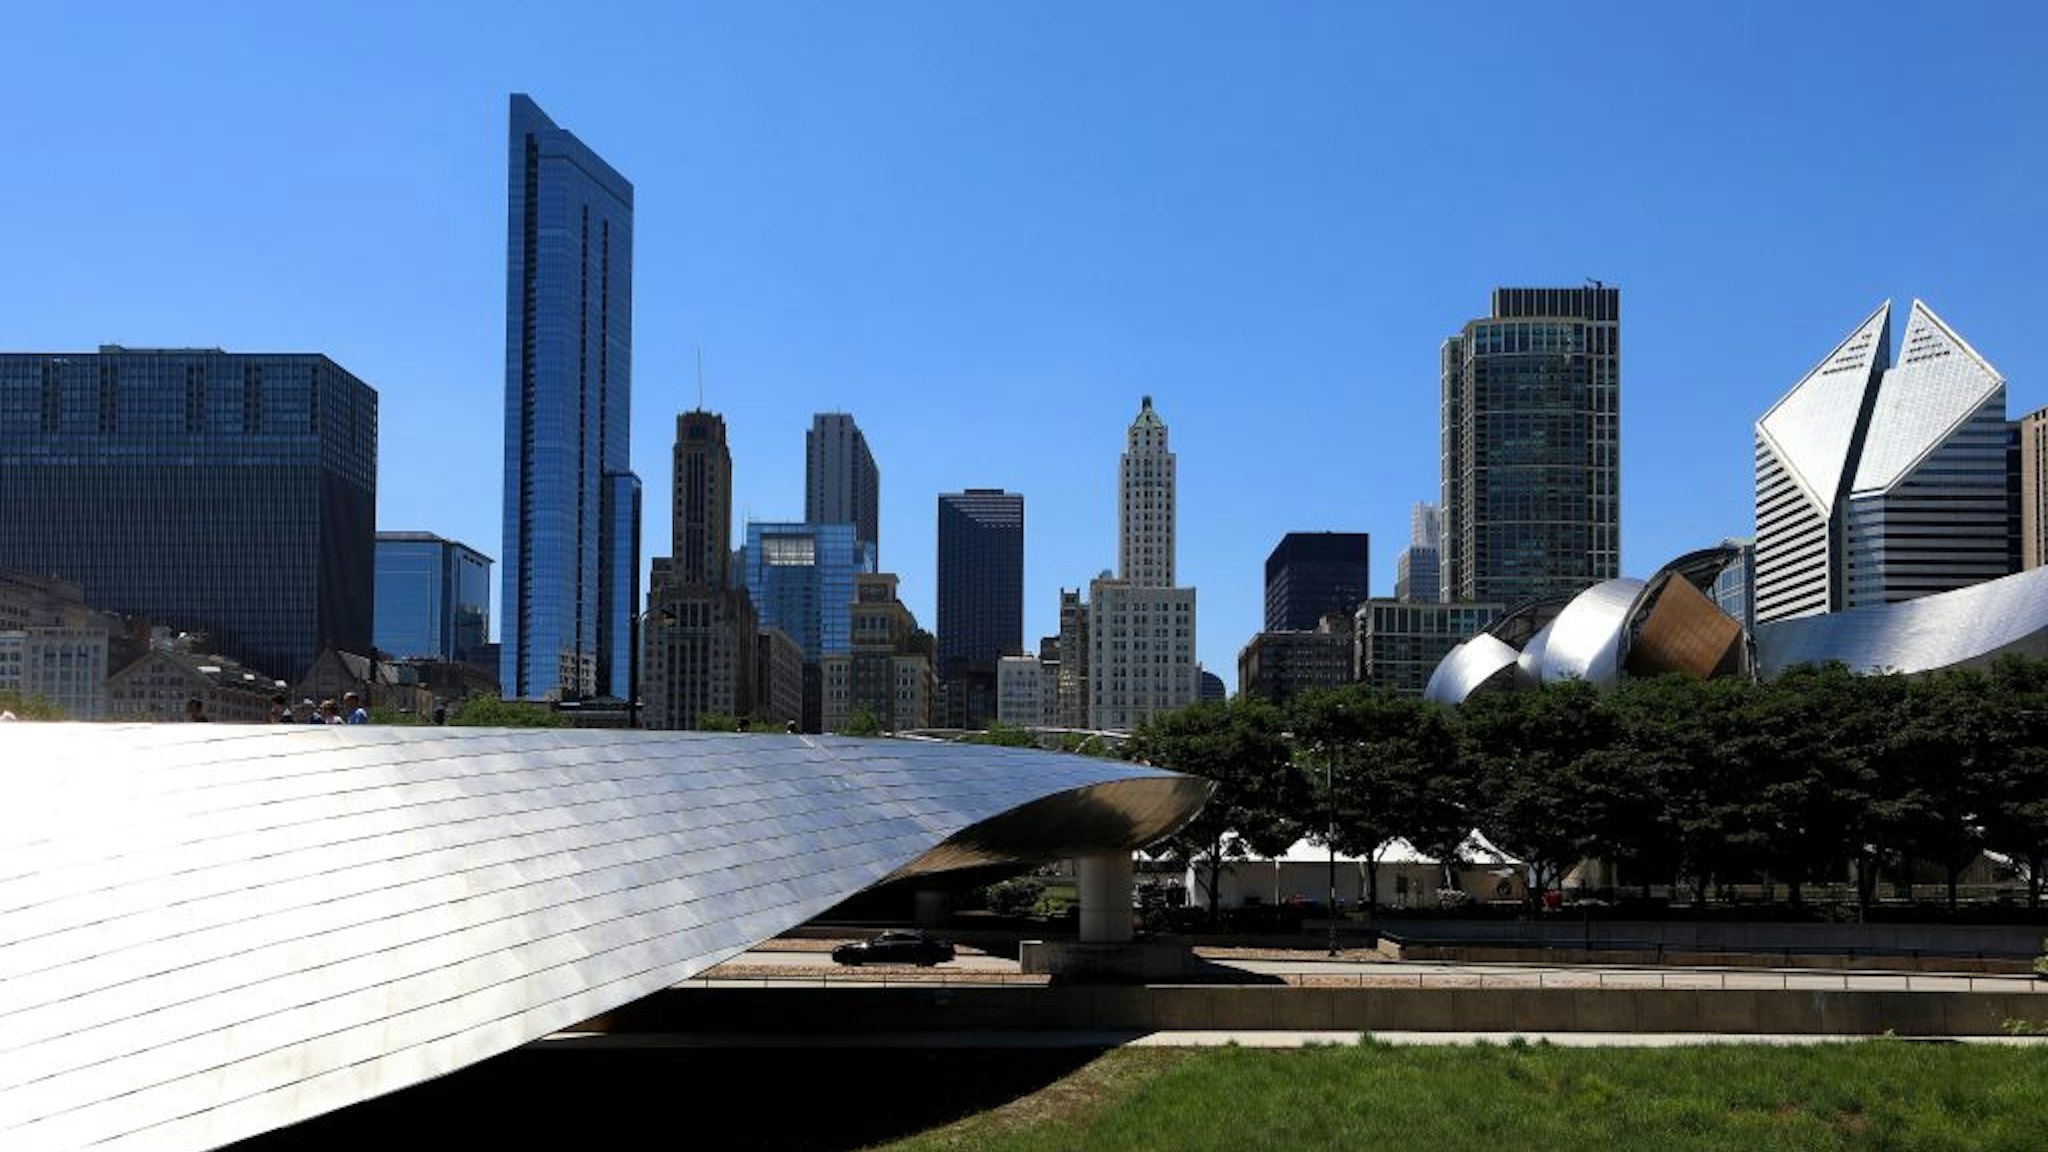 View looking West into Downtown Chicago, as photographed from architect Frank Gehry's BP Bridge in Millennium Park in Chicago, Illinois on June 23, 2018.